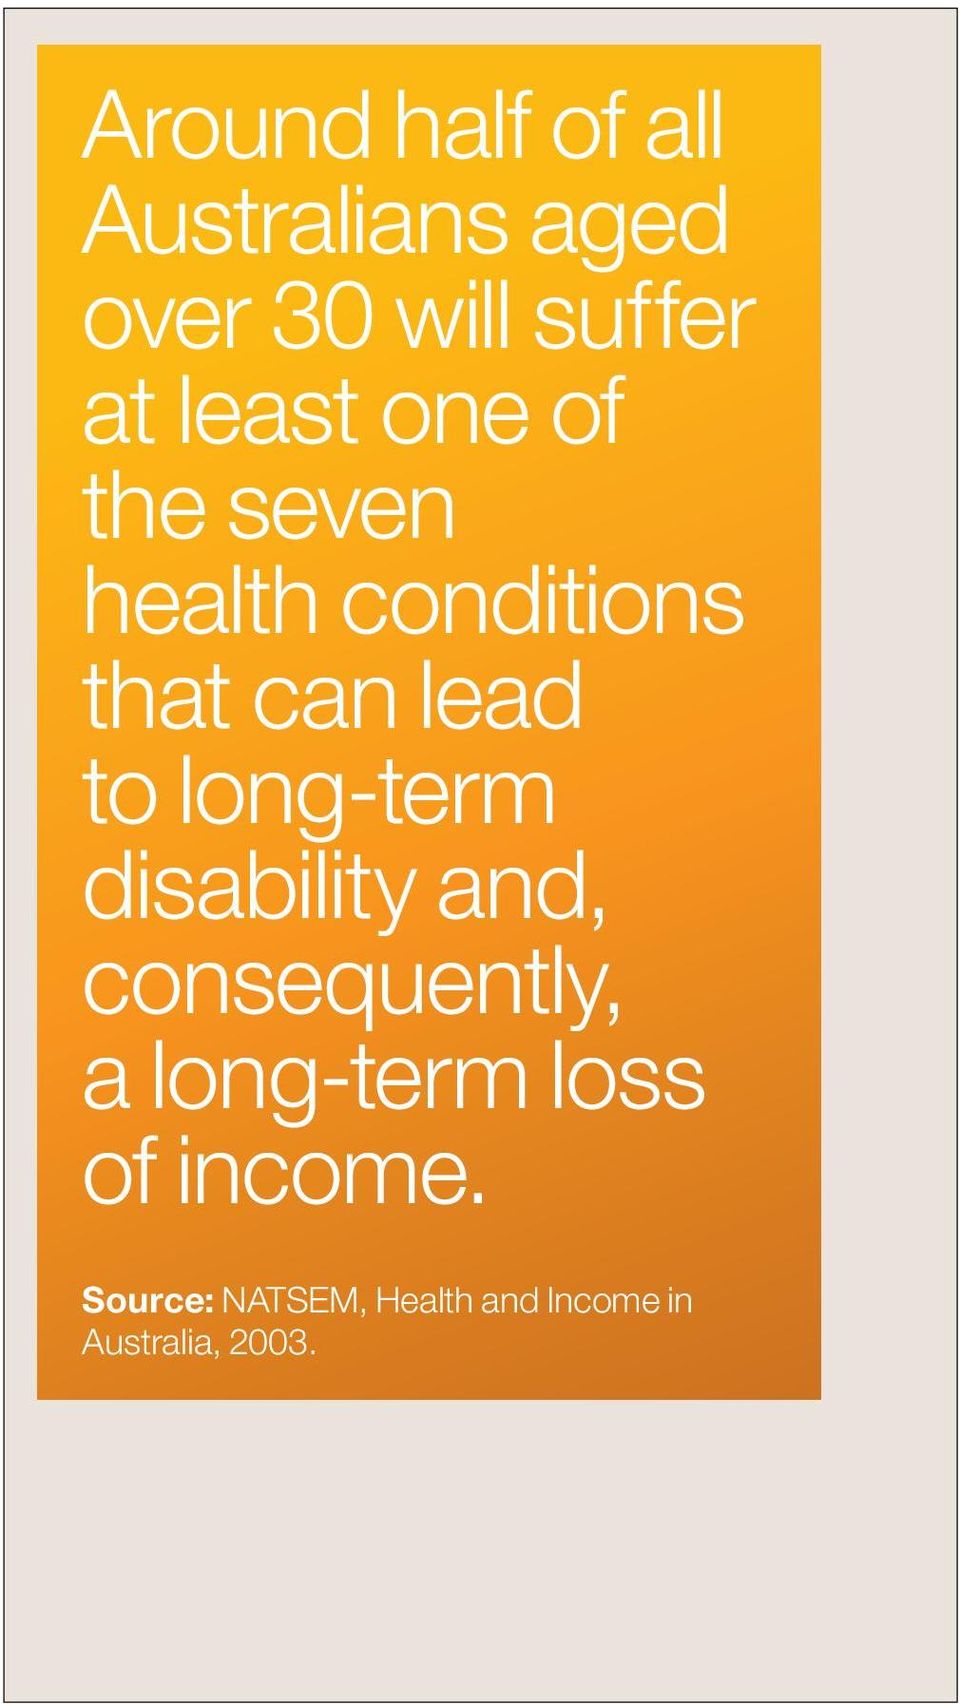 long-term disability and, consequently, a long-term loss of